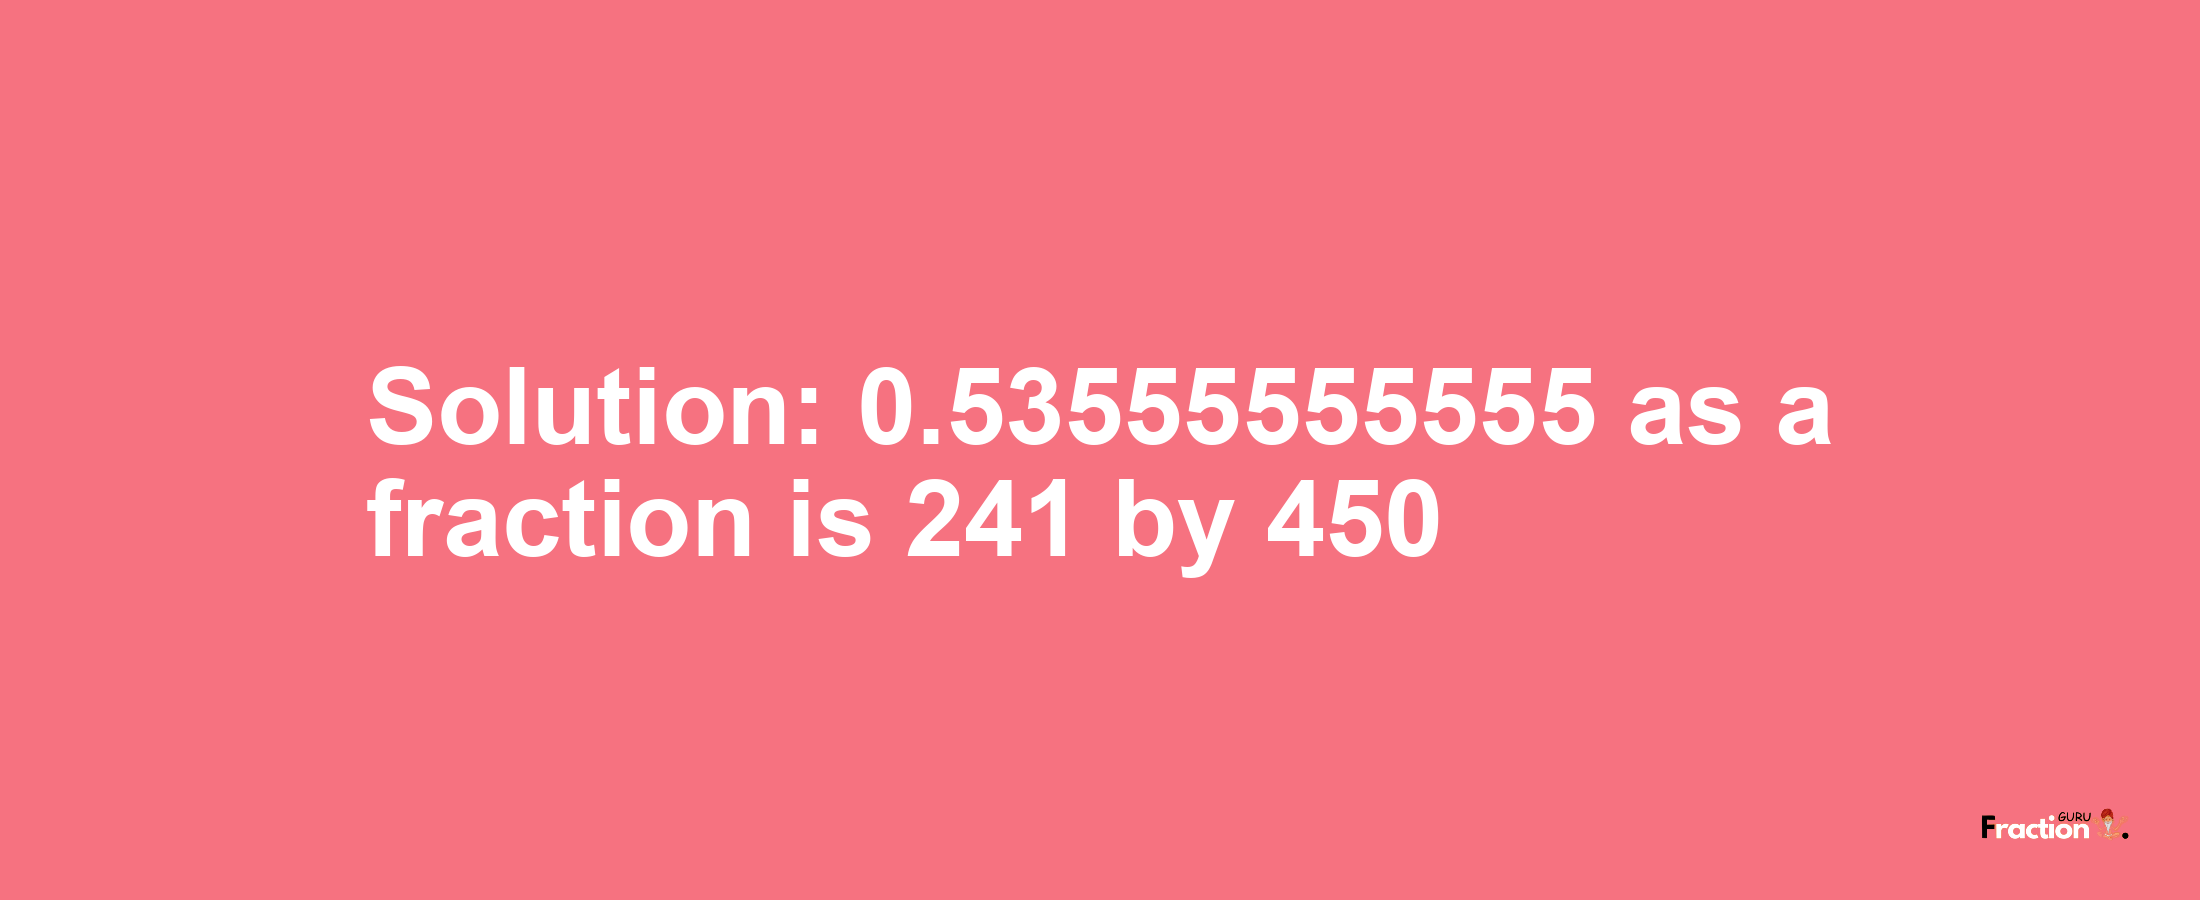 Solution:0.53555555555 as a fraction is 241/450